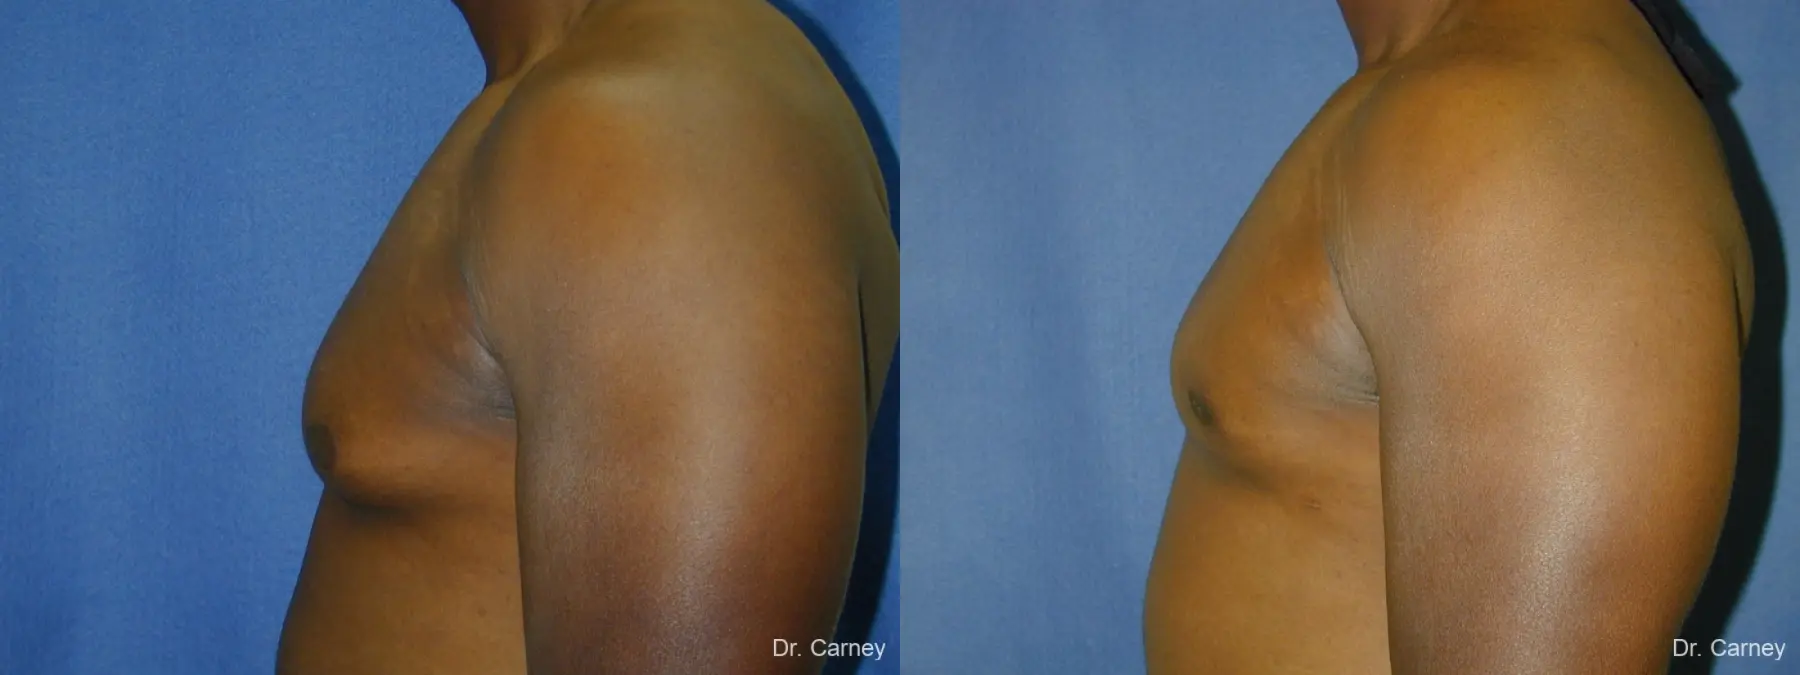 Virginia Beach Gynecomastia 1226 - Before and After 5